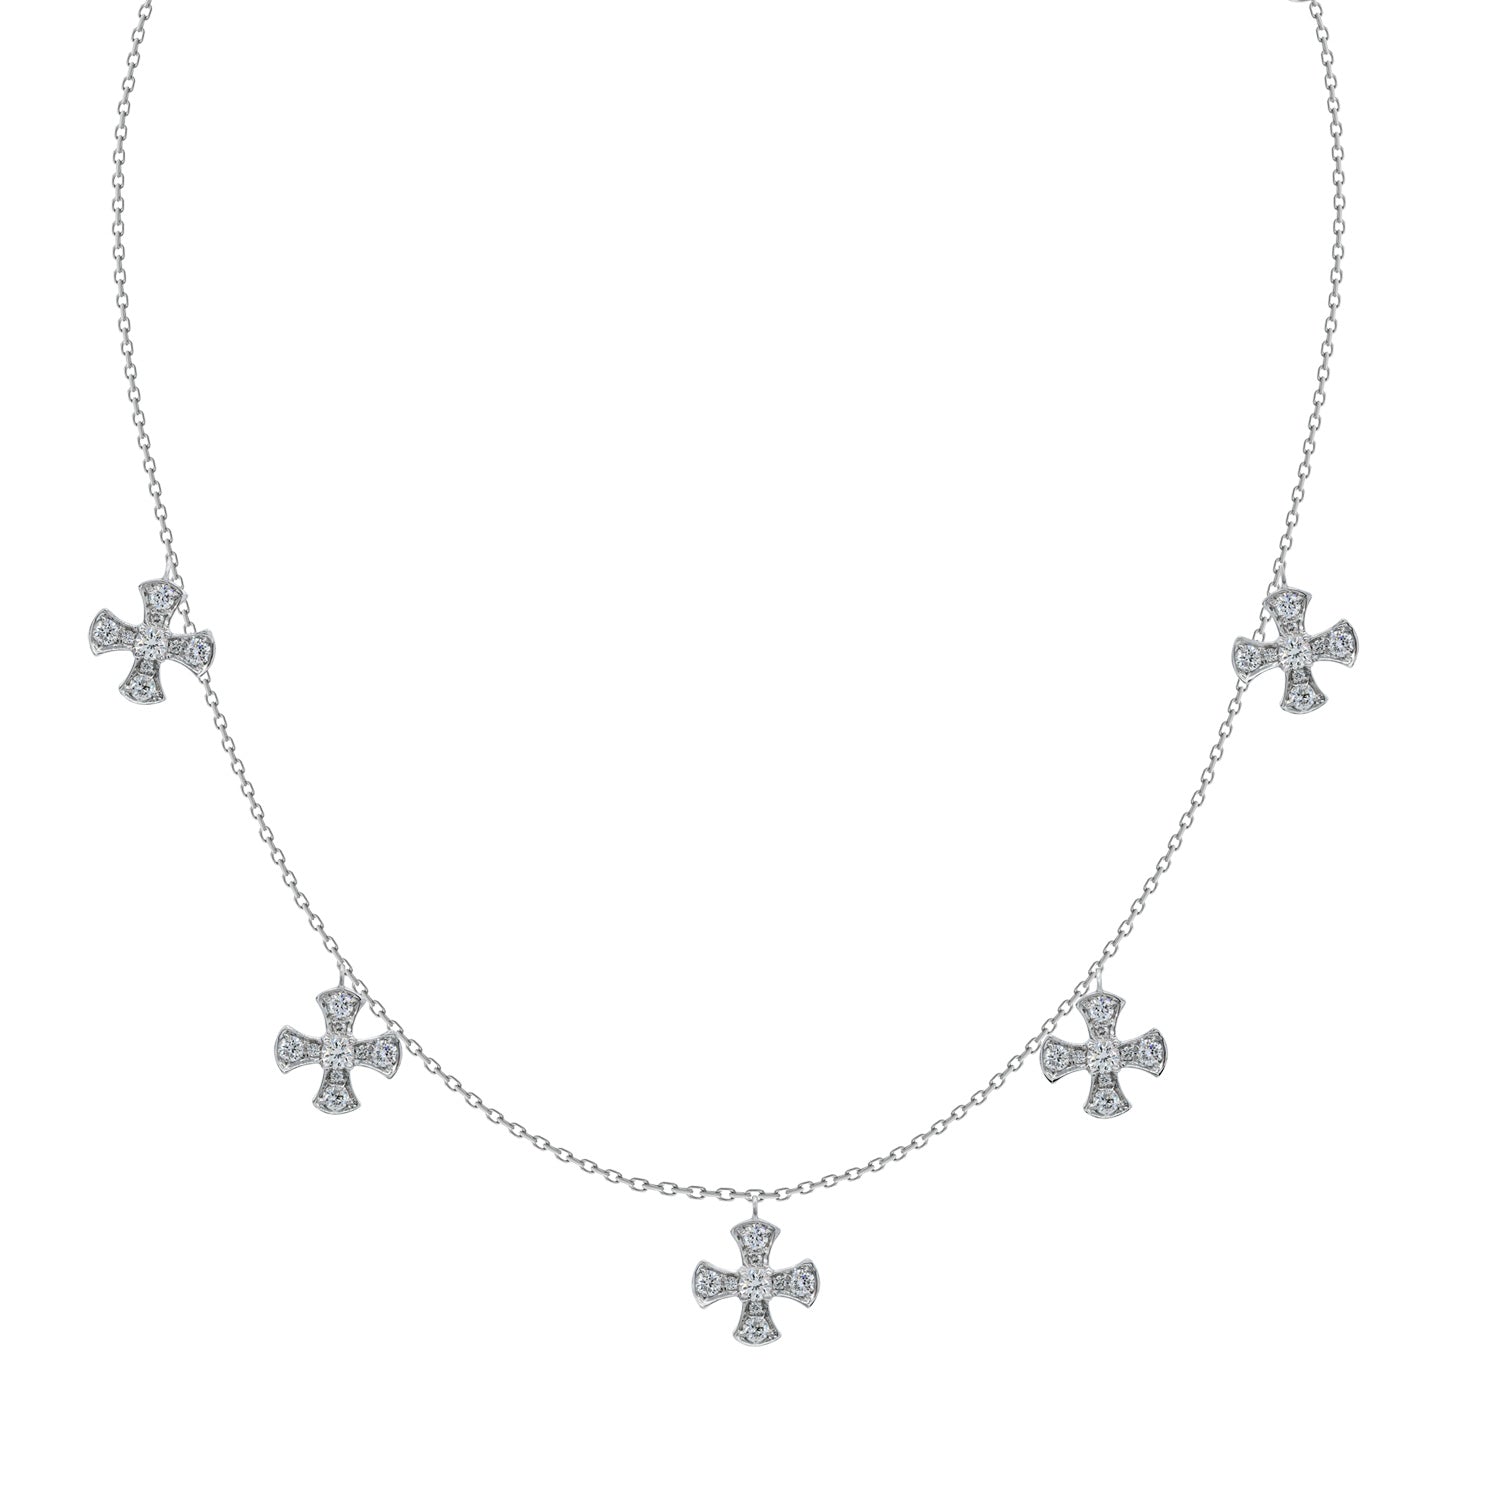 Hanging Crosses Necklace